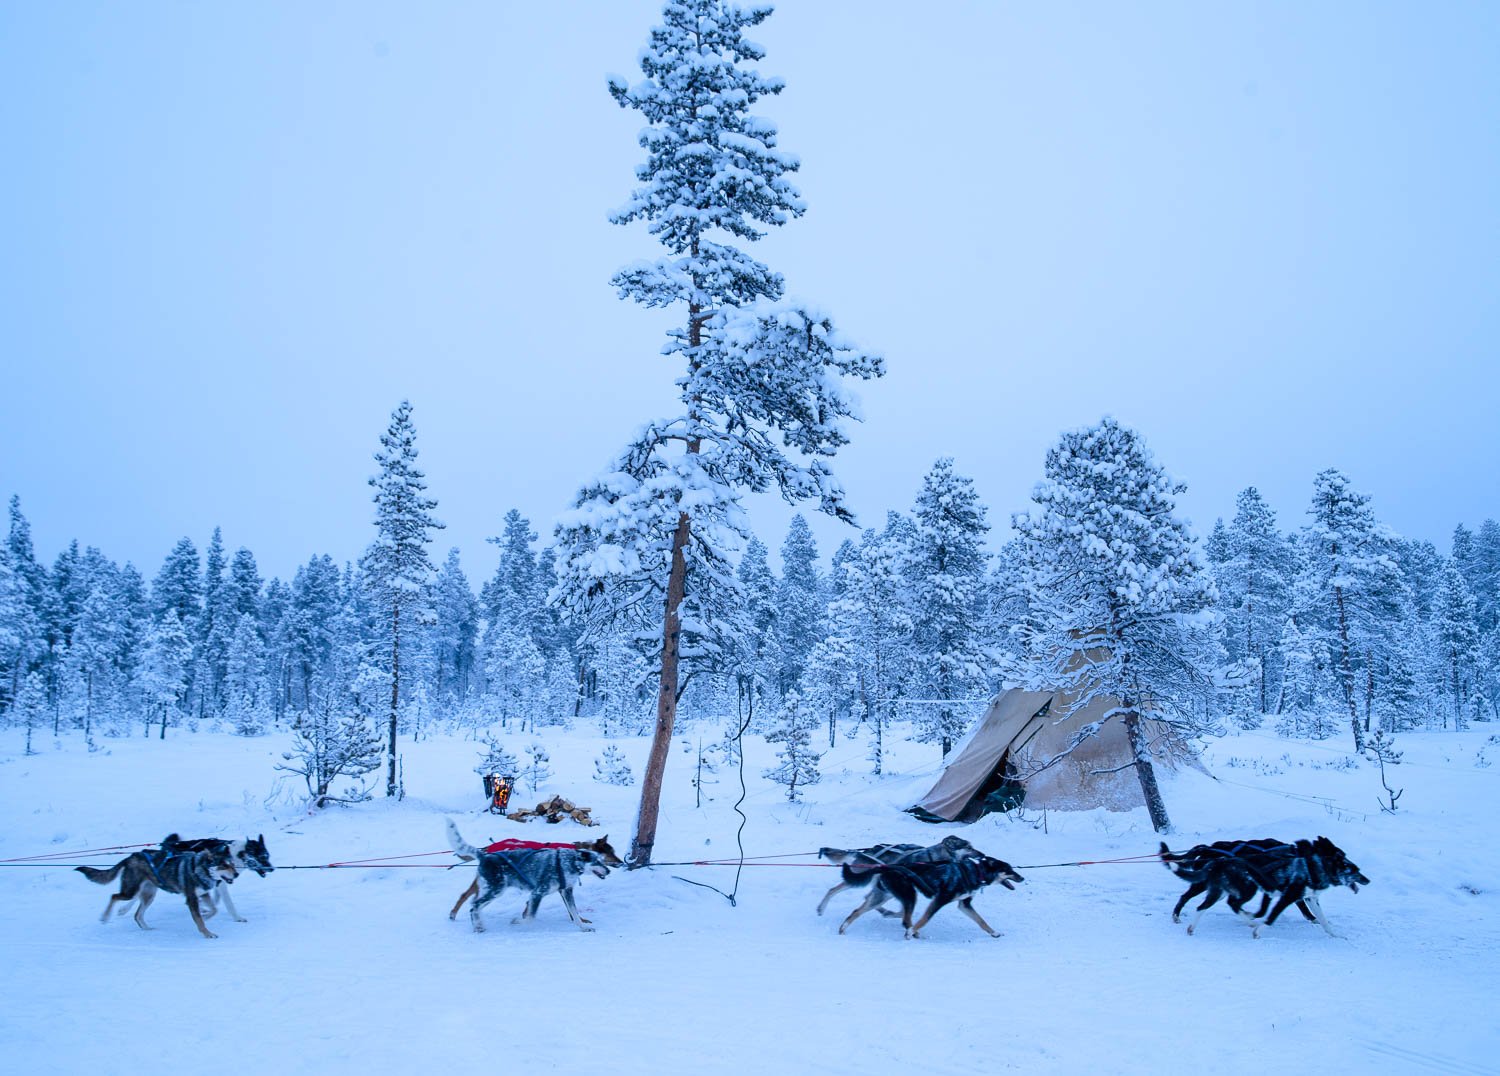 A snow-covered jungle, and some wild animals passing by, Sweden #28